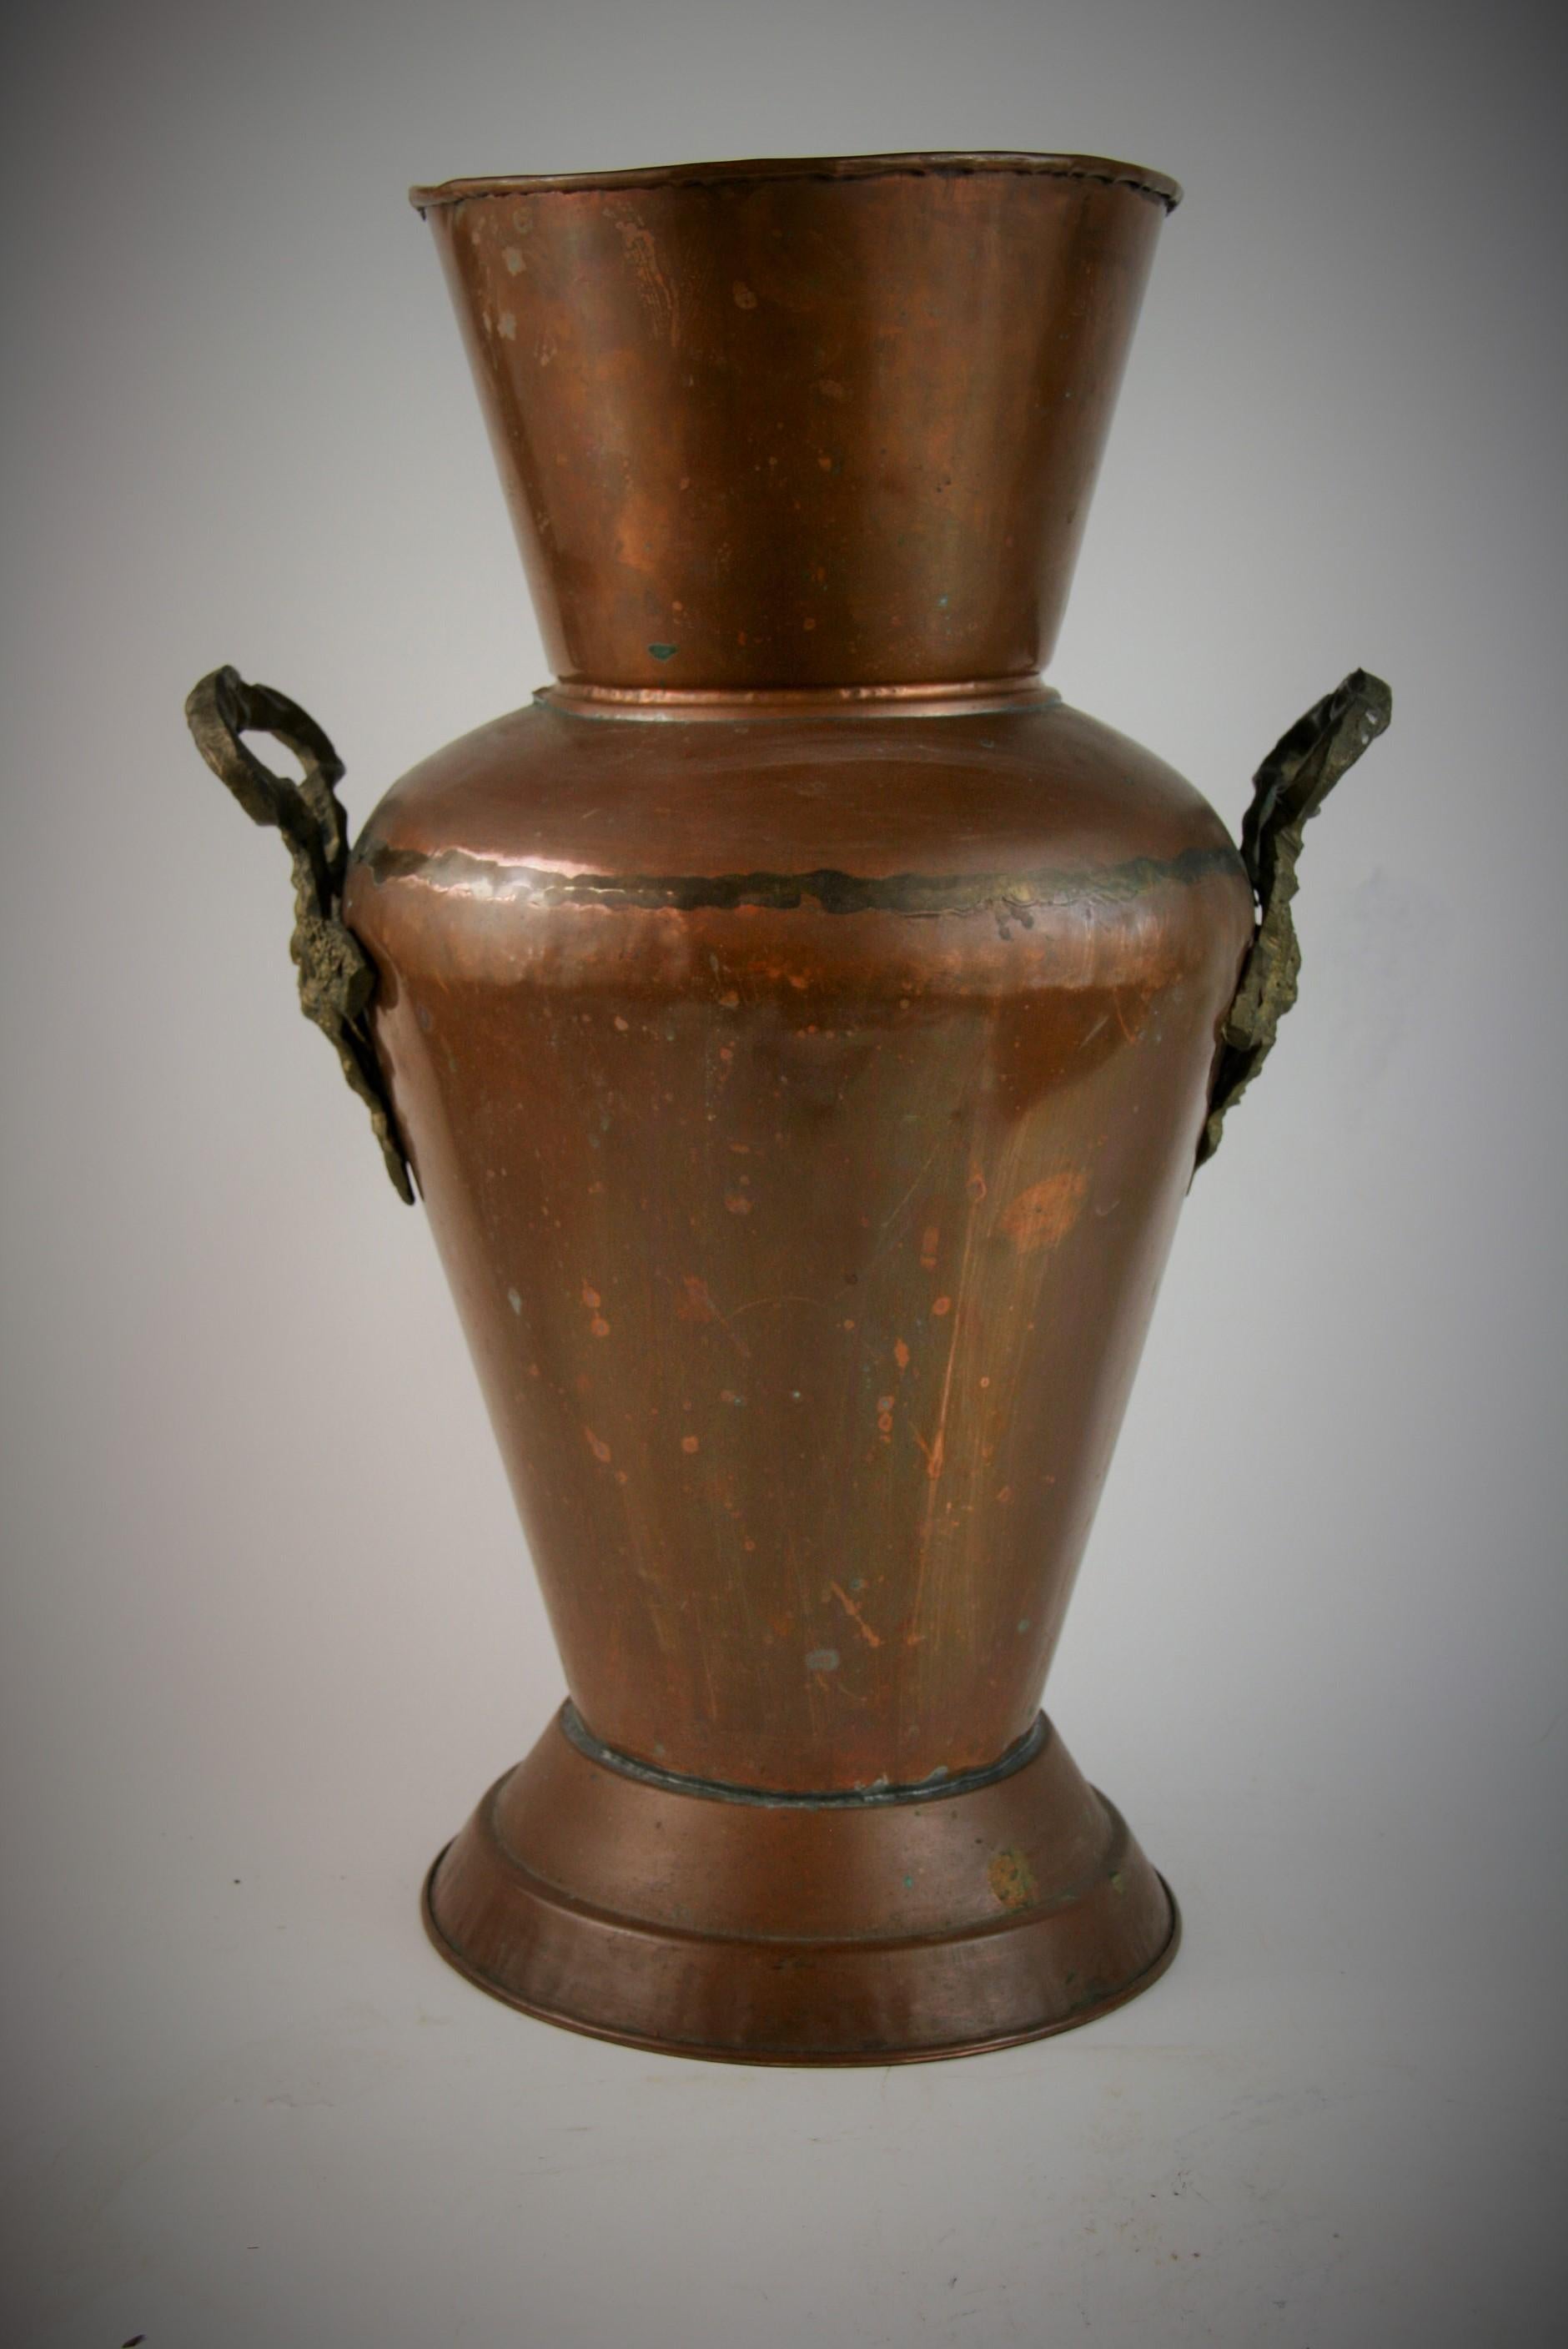 2-347 Handmade garden copper vase with cast brass handles.
Can be used as umbrella/stick stand